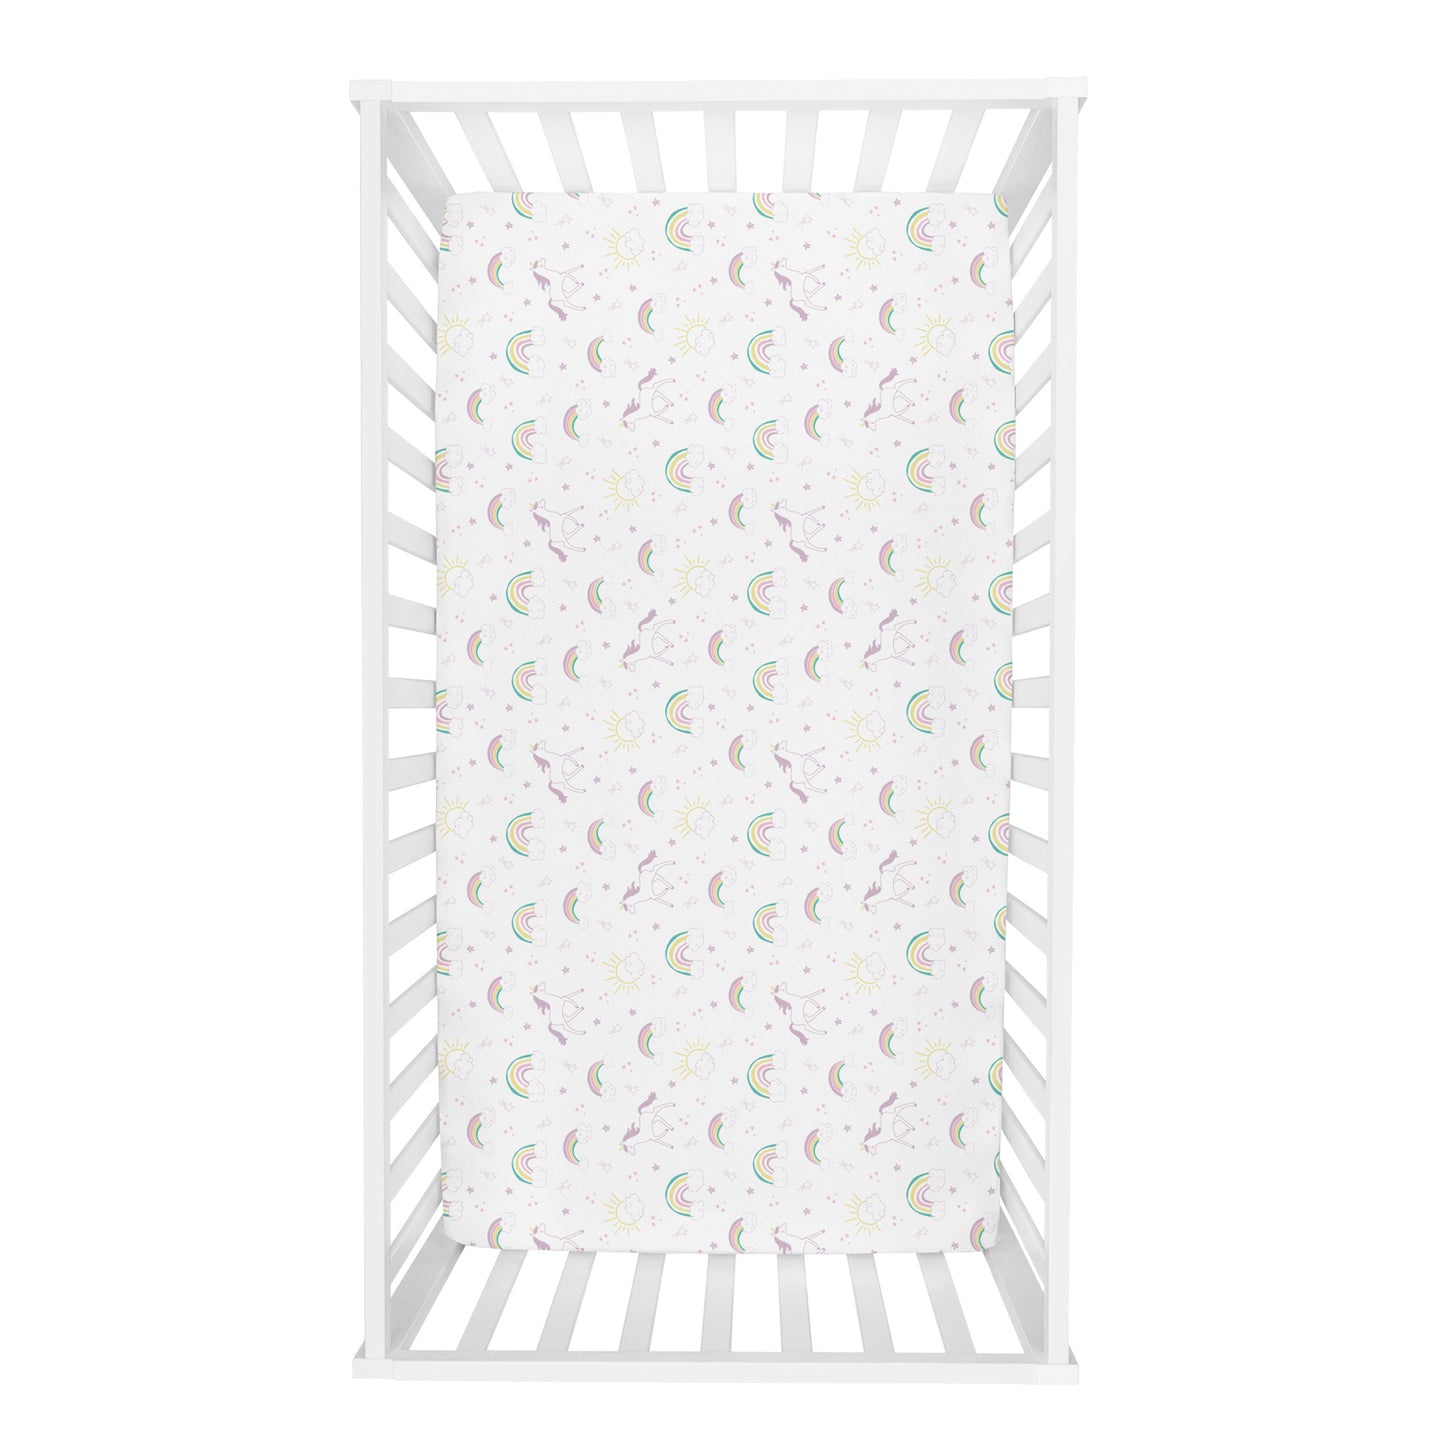 Unicorn Rainbow Deluxe Flannel Fitted Crib Sheet